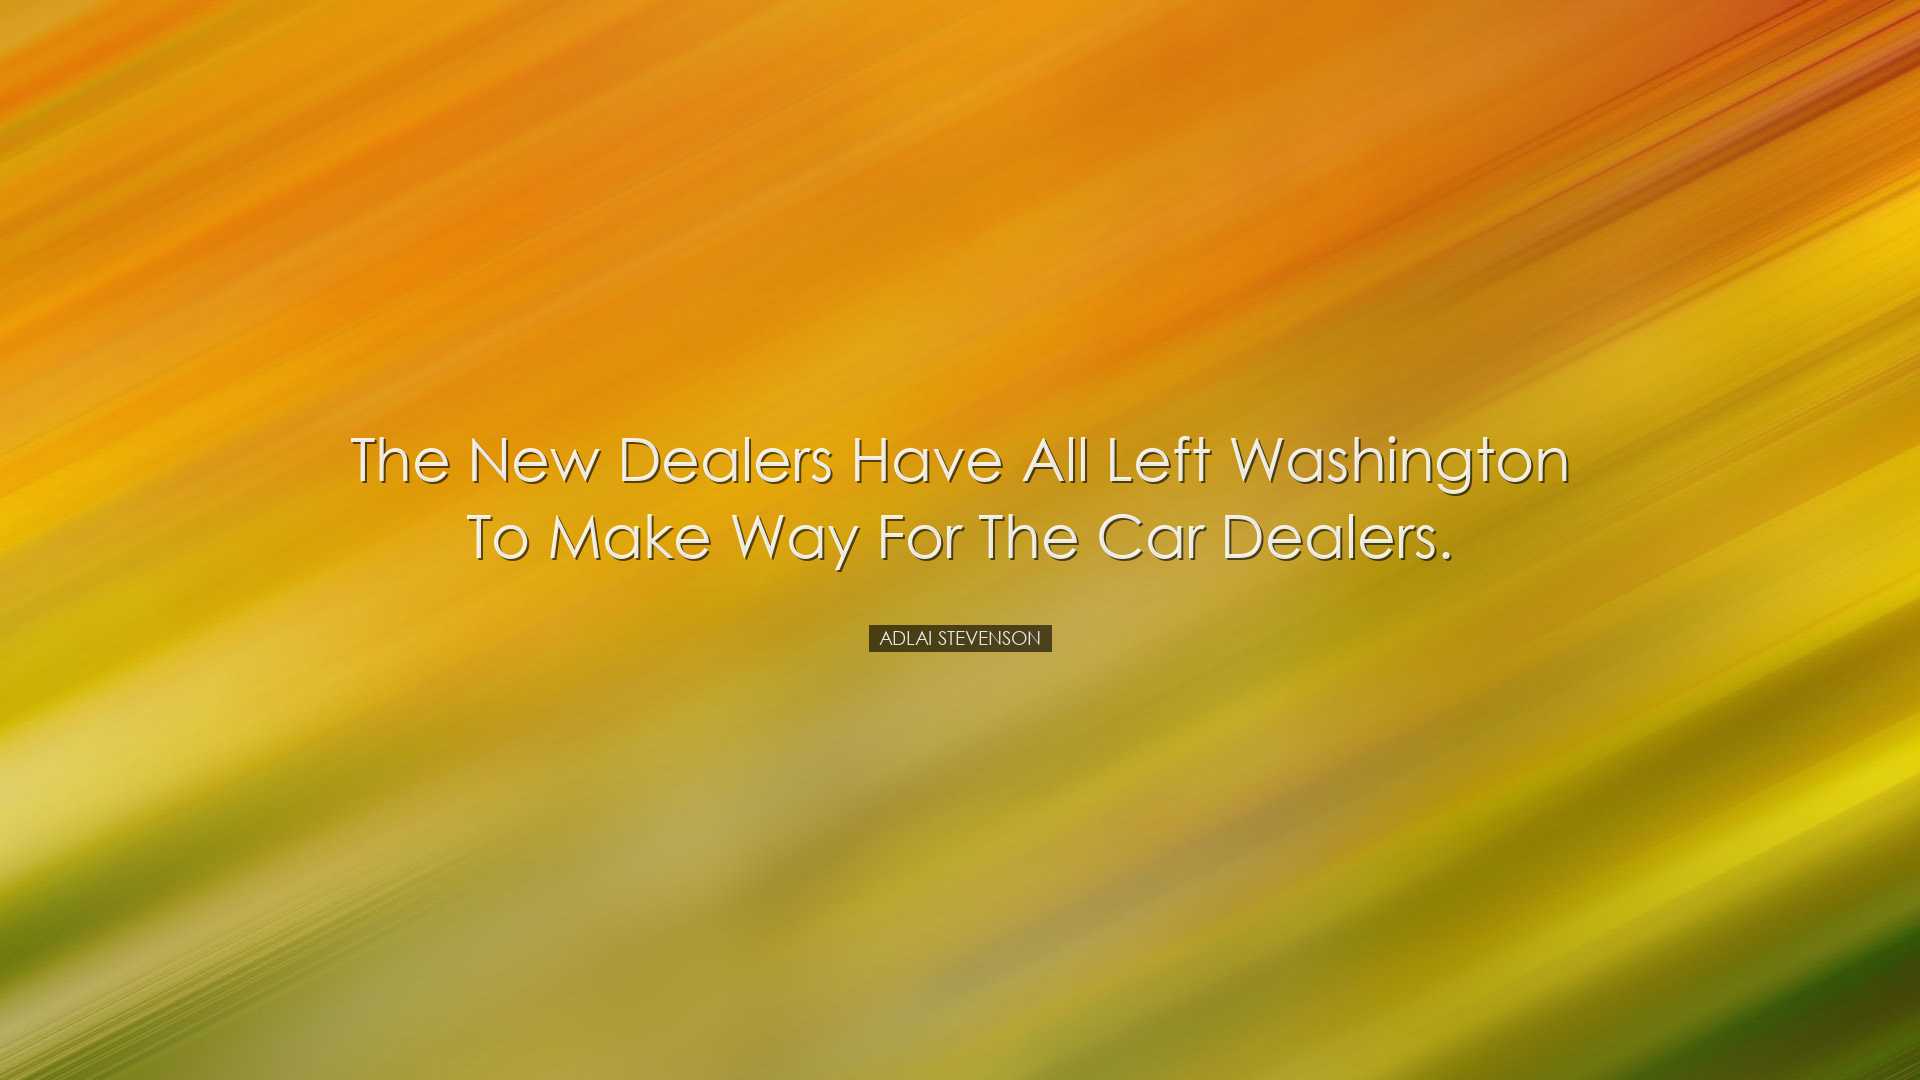 The New Dealers have all left Washington to make way for the car d